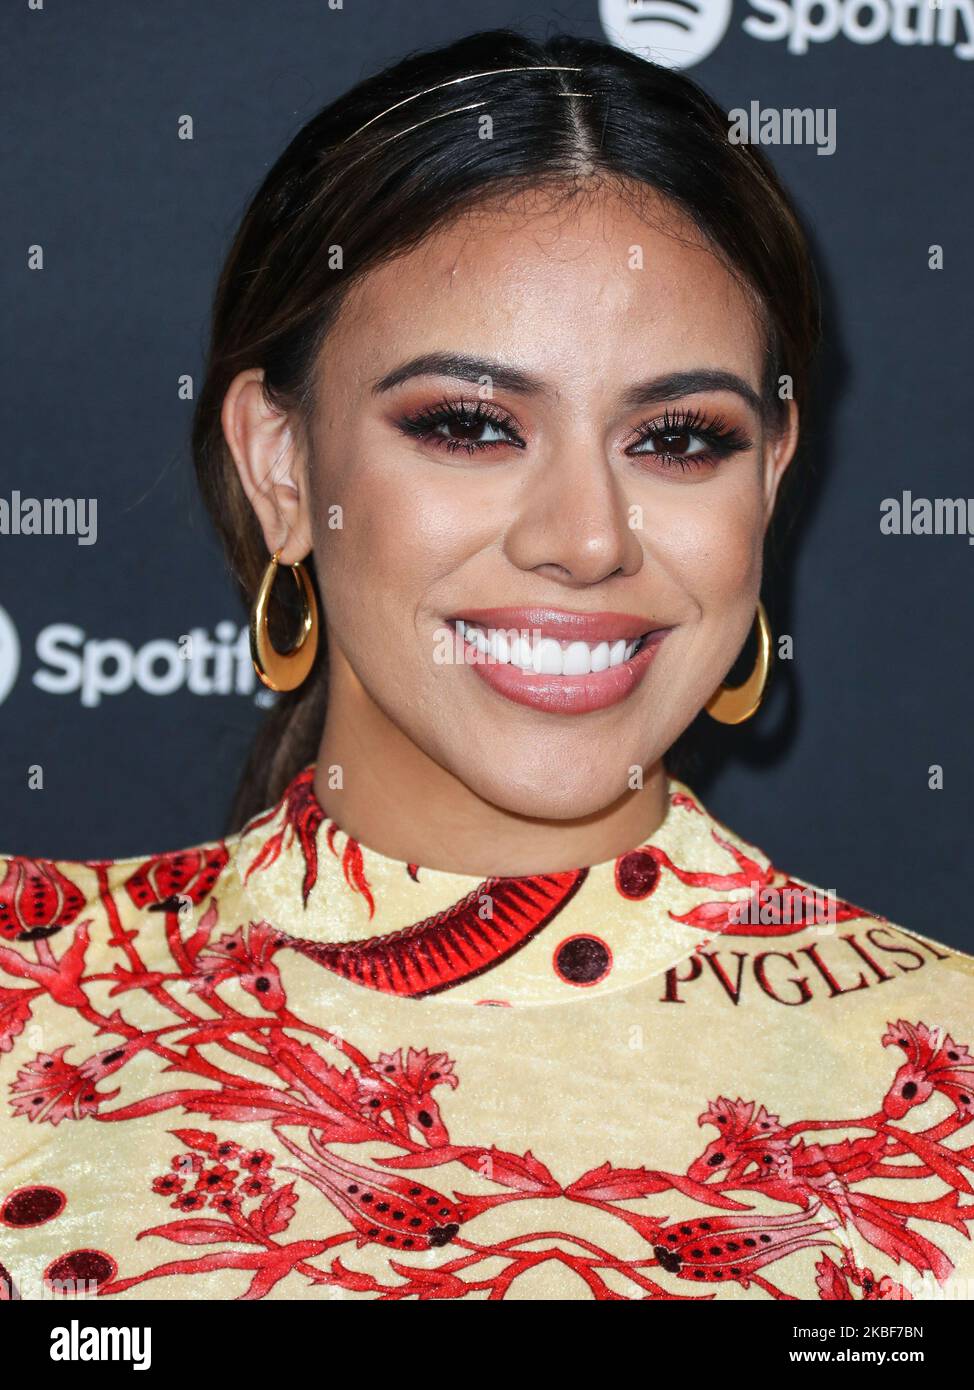 WEST HOLLYWOOD, LOS ANGELES, CALIFORNIA, USA - JANUARY 23: Singer Dinah Jane wearing Fausto Puglisi arrives at the Spotify Best New Artist 2020 Party held at The Lot Studios on January 23, 2020 in West Hollywood, Los Angeles, California, United States. (Photo by Xavier Collin/Image Press Agency/NurPhoto) Stock Photo